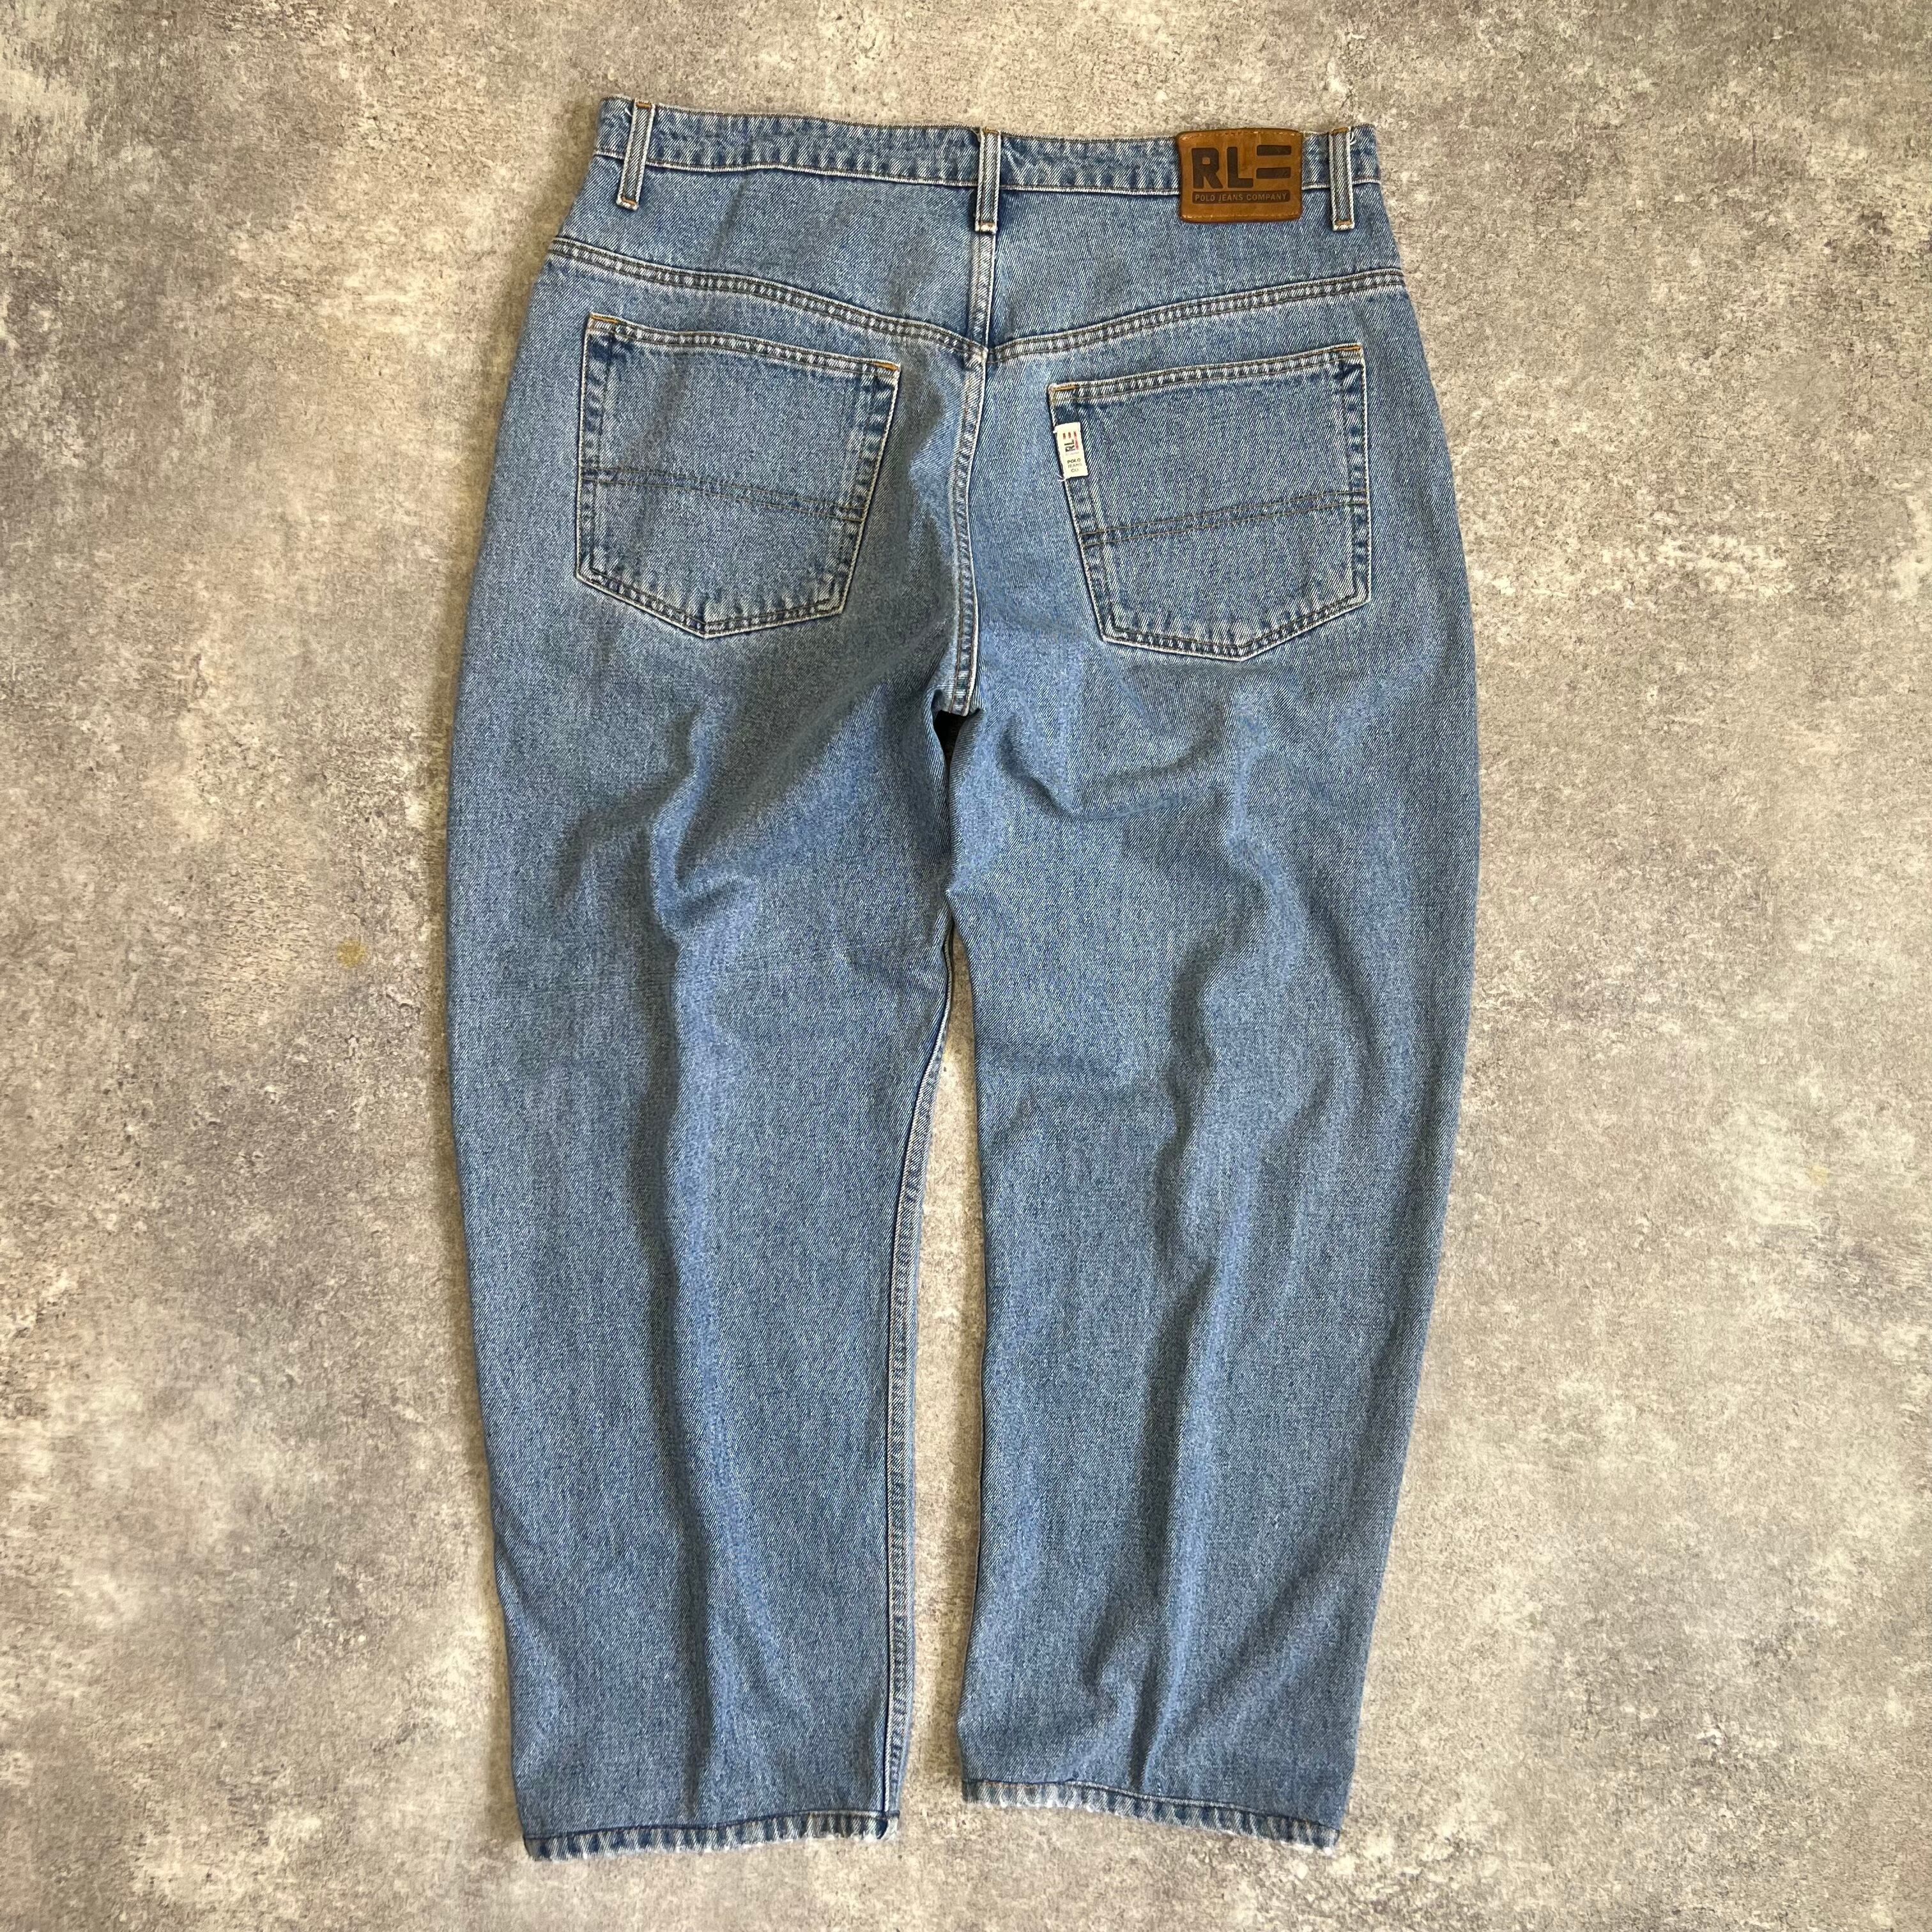 w36】 POLO JEANS RALPH LAURENデニム | i-D -U.S.A used clothes